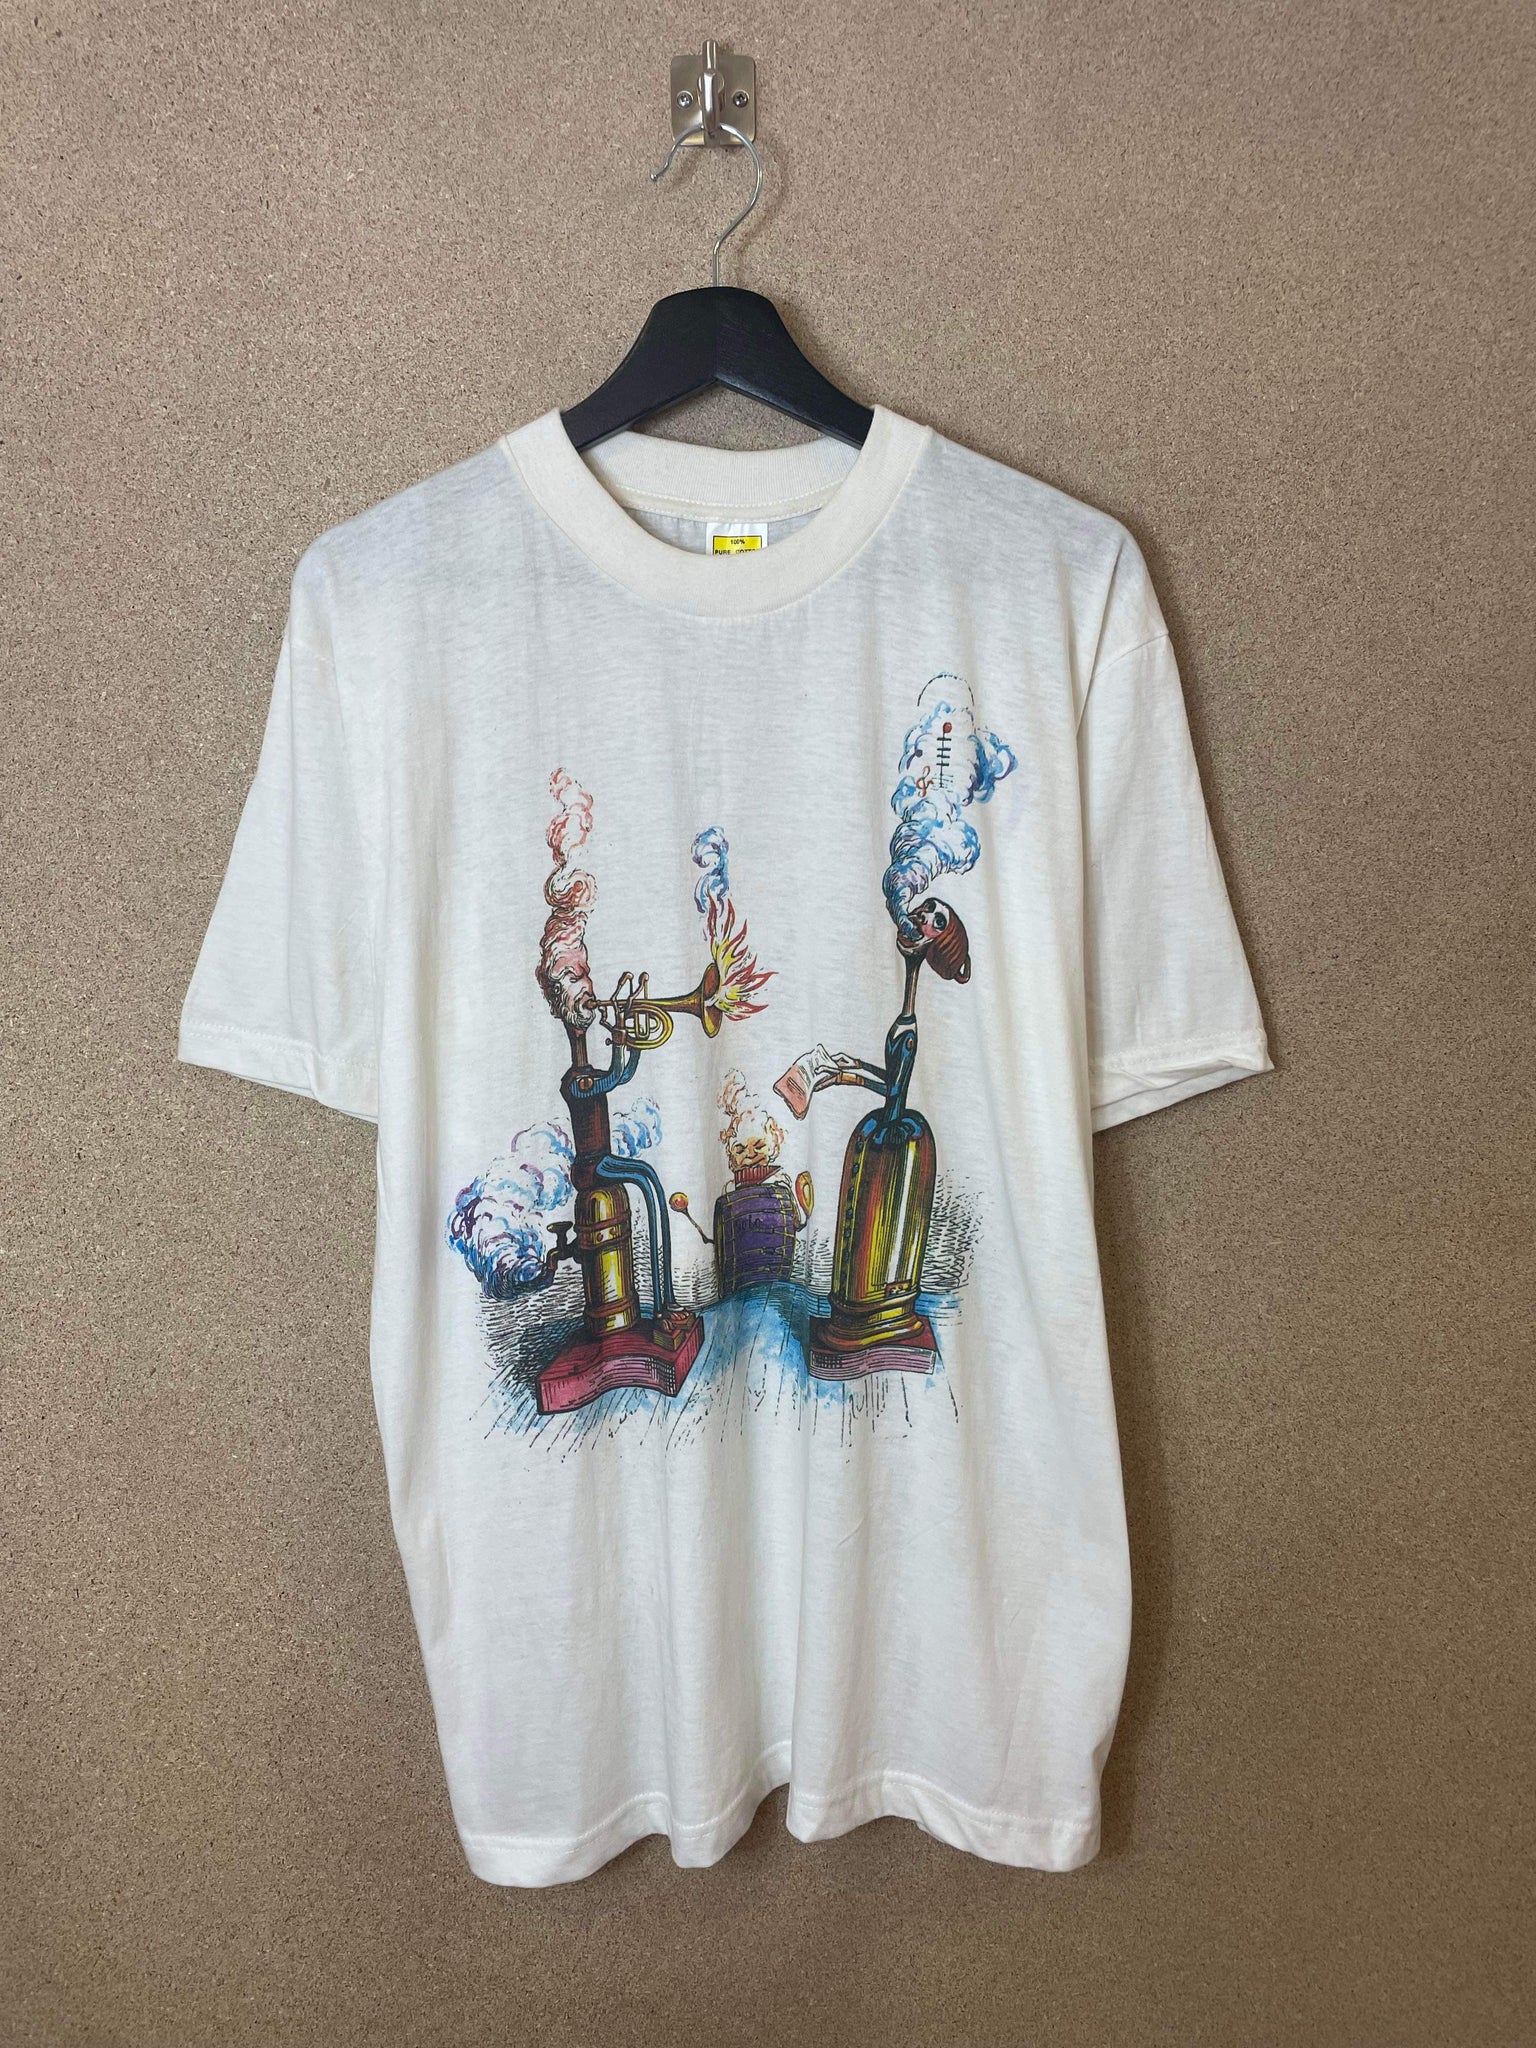 Vintage Queen The Crazy Convention 1992 Tee - L